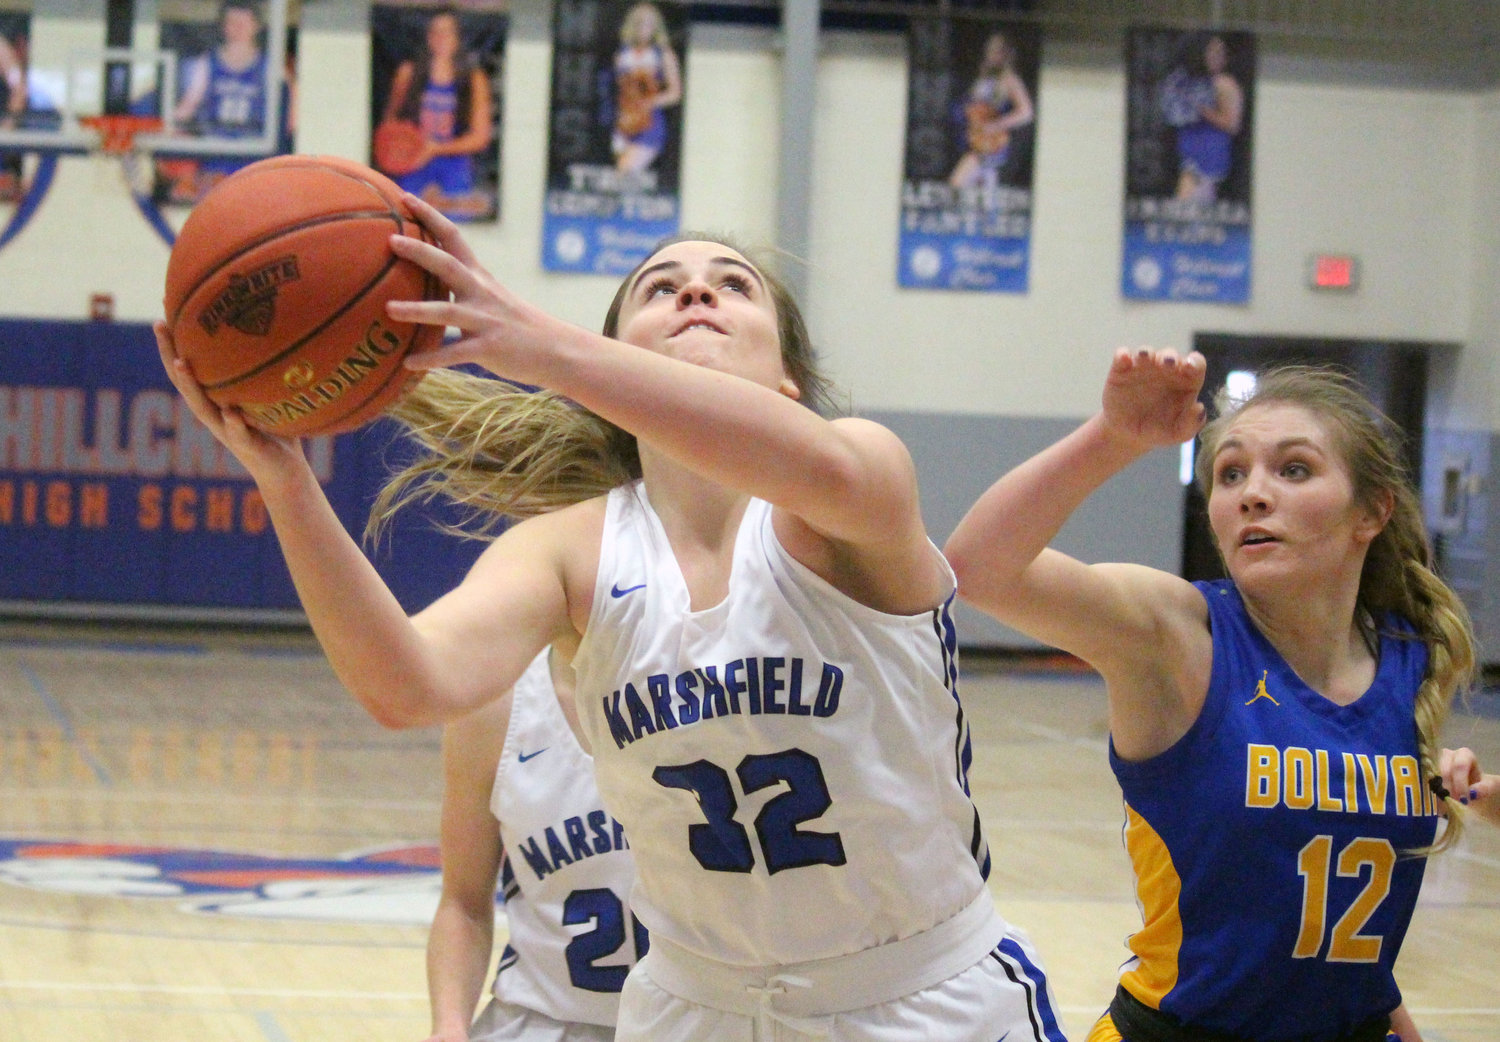 Marshfield’s former player Maile Peck attempts a short-range basket in the second half of the defeat to Bolivar during the 2020 tournament.